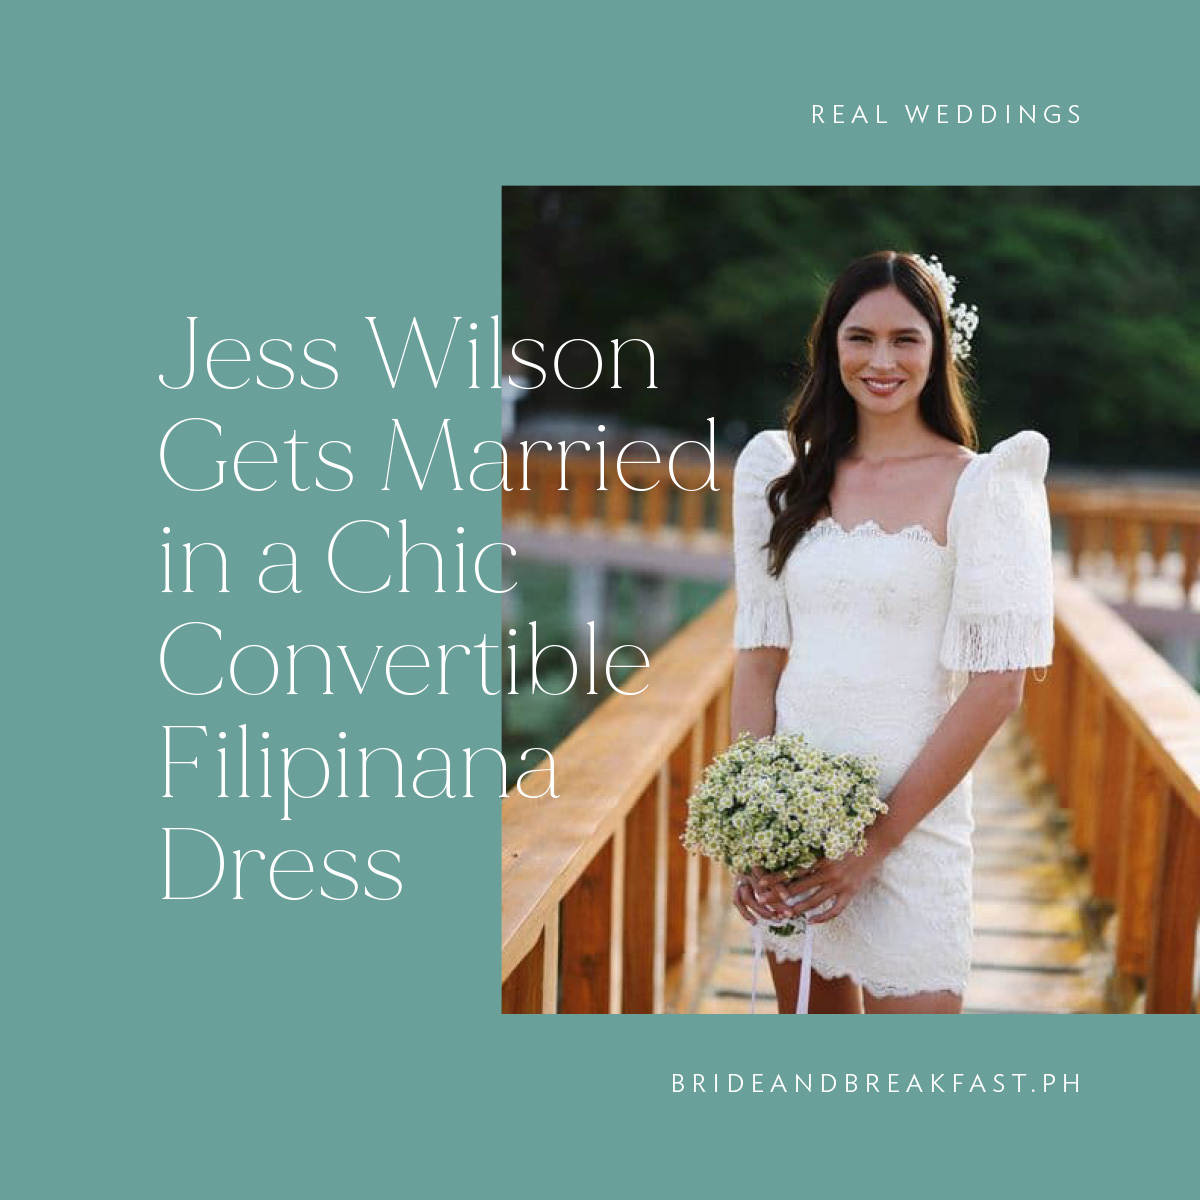 Jess Wilson Gets Married in a Chic Convertible Filipinana Dress